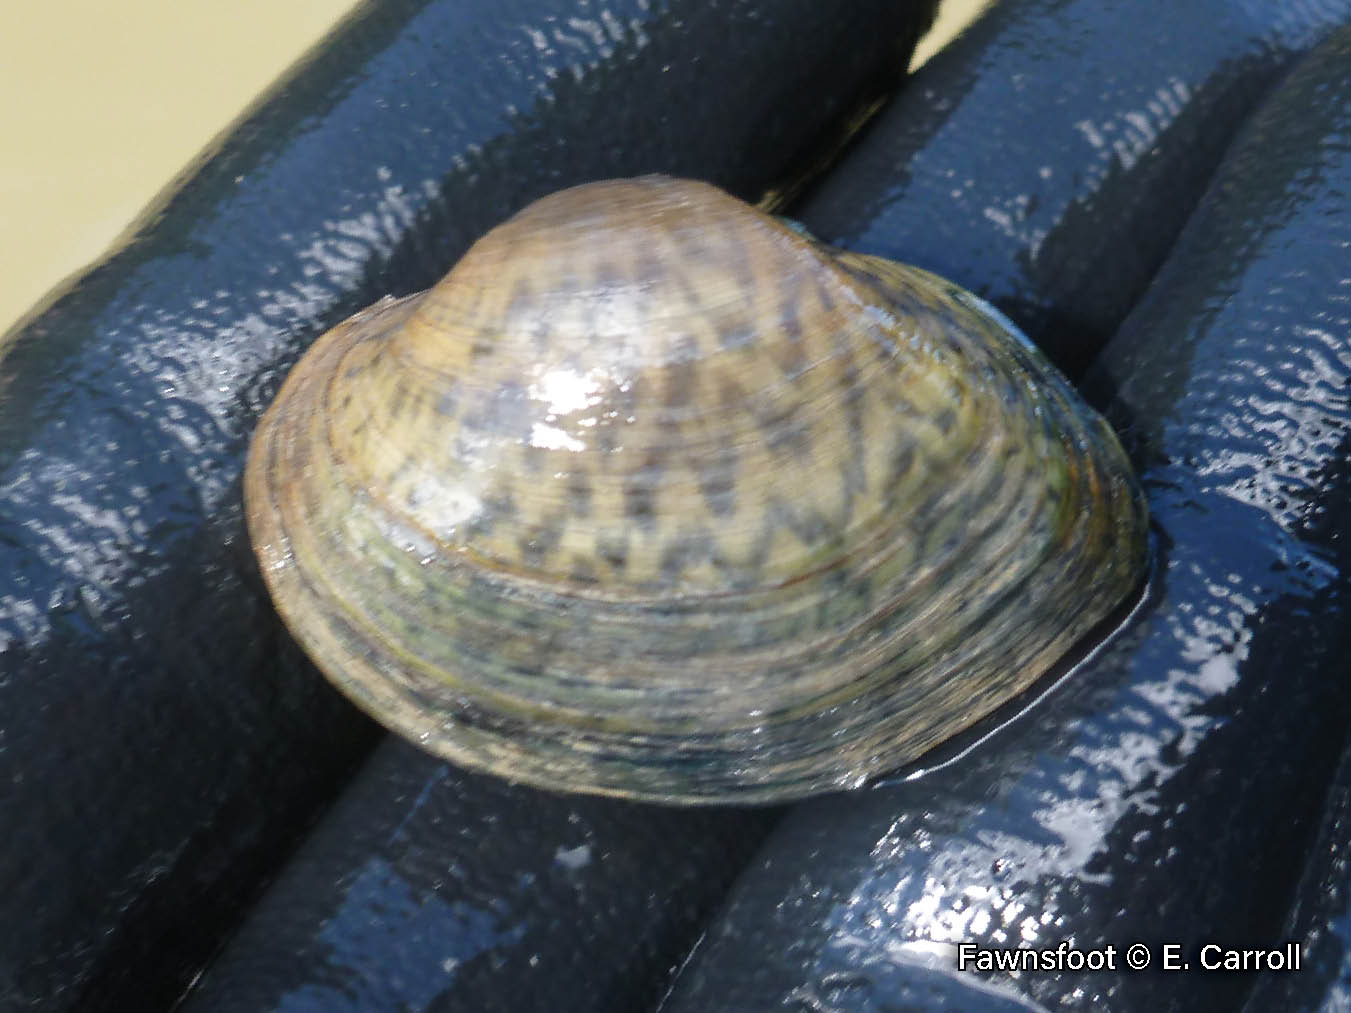 Picture of a Fawnsfoot mussel in a gloved hand, a small, light brown mussel with chevron markings